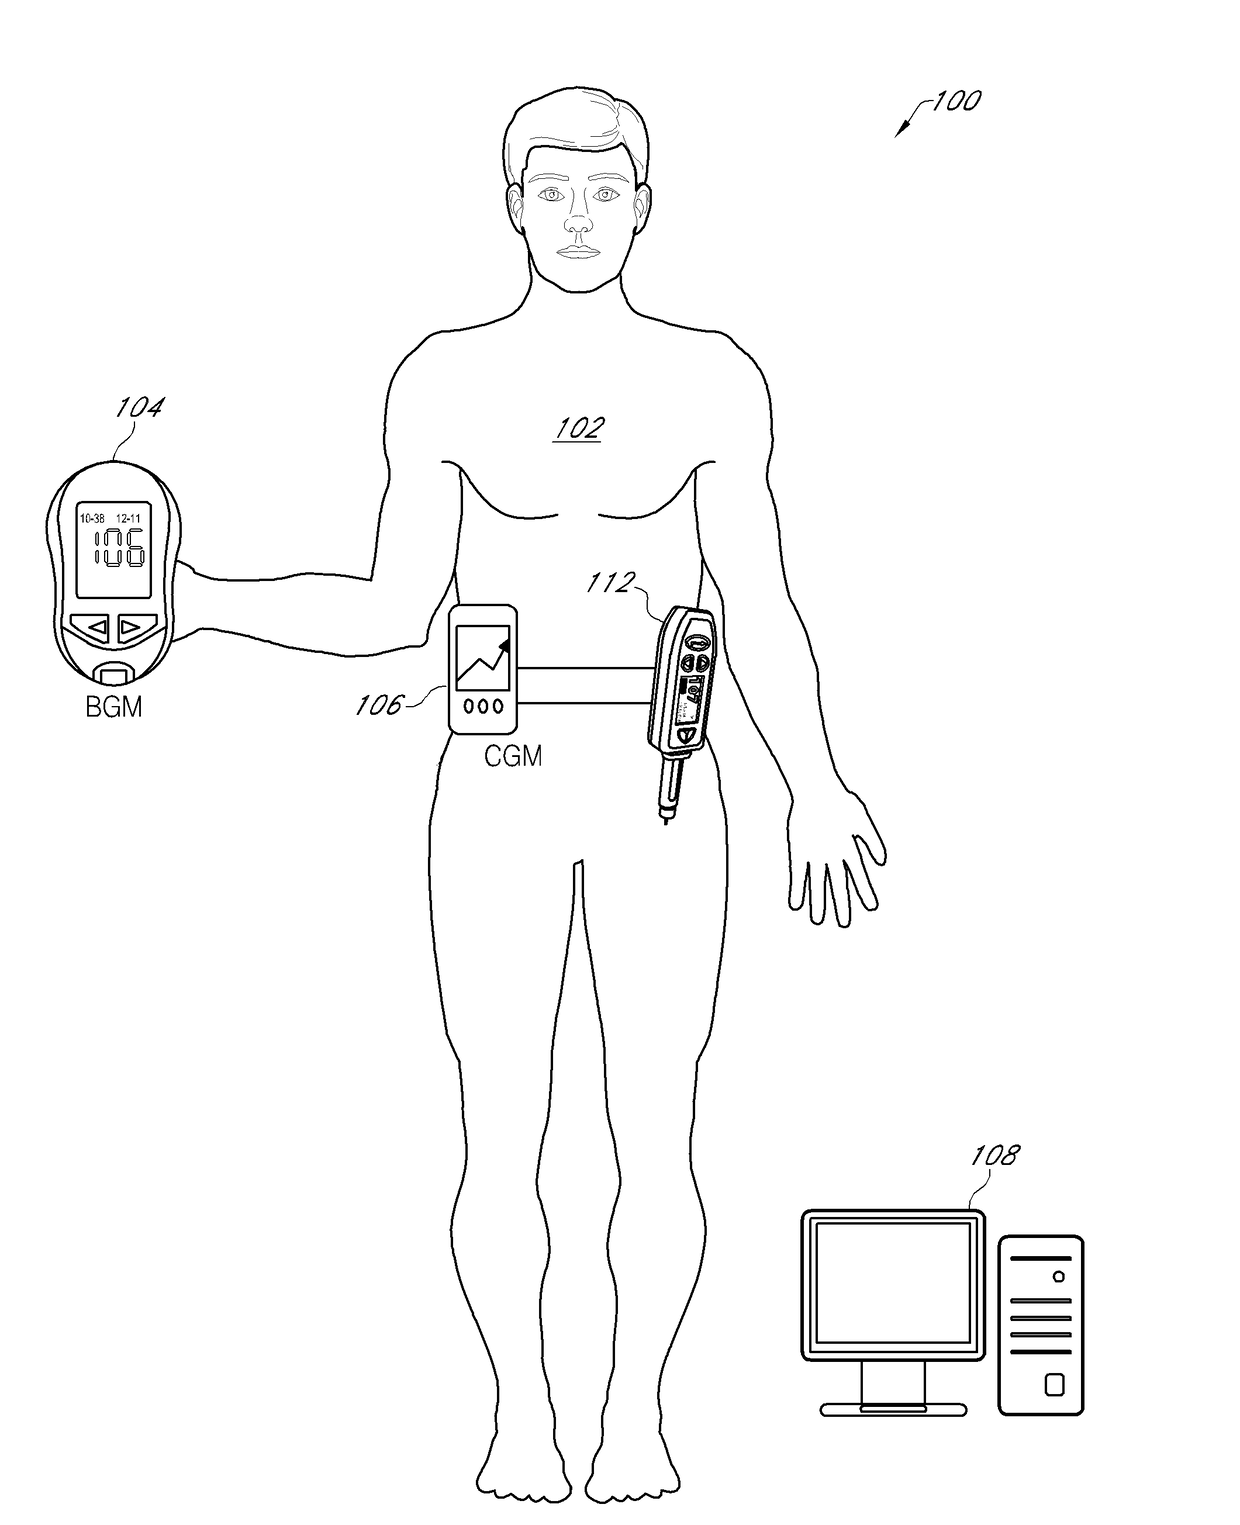 Continuous glucose monitoring injection device